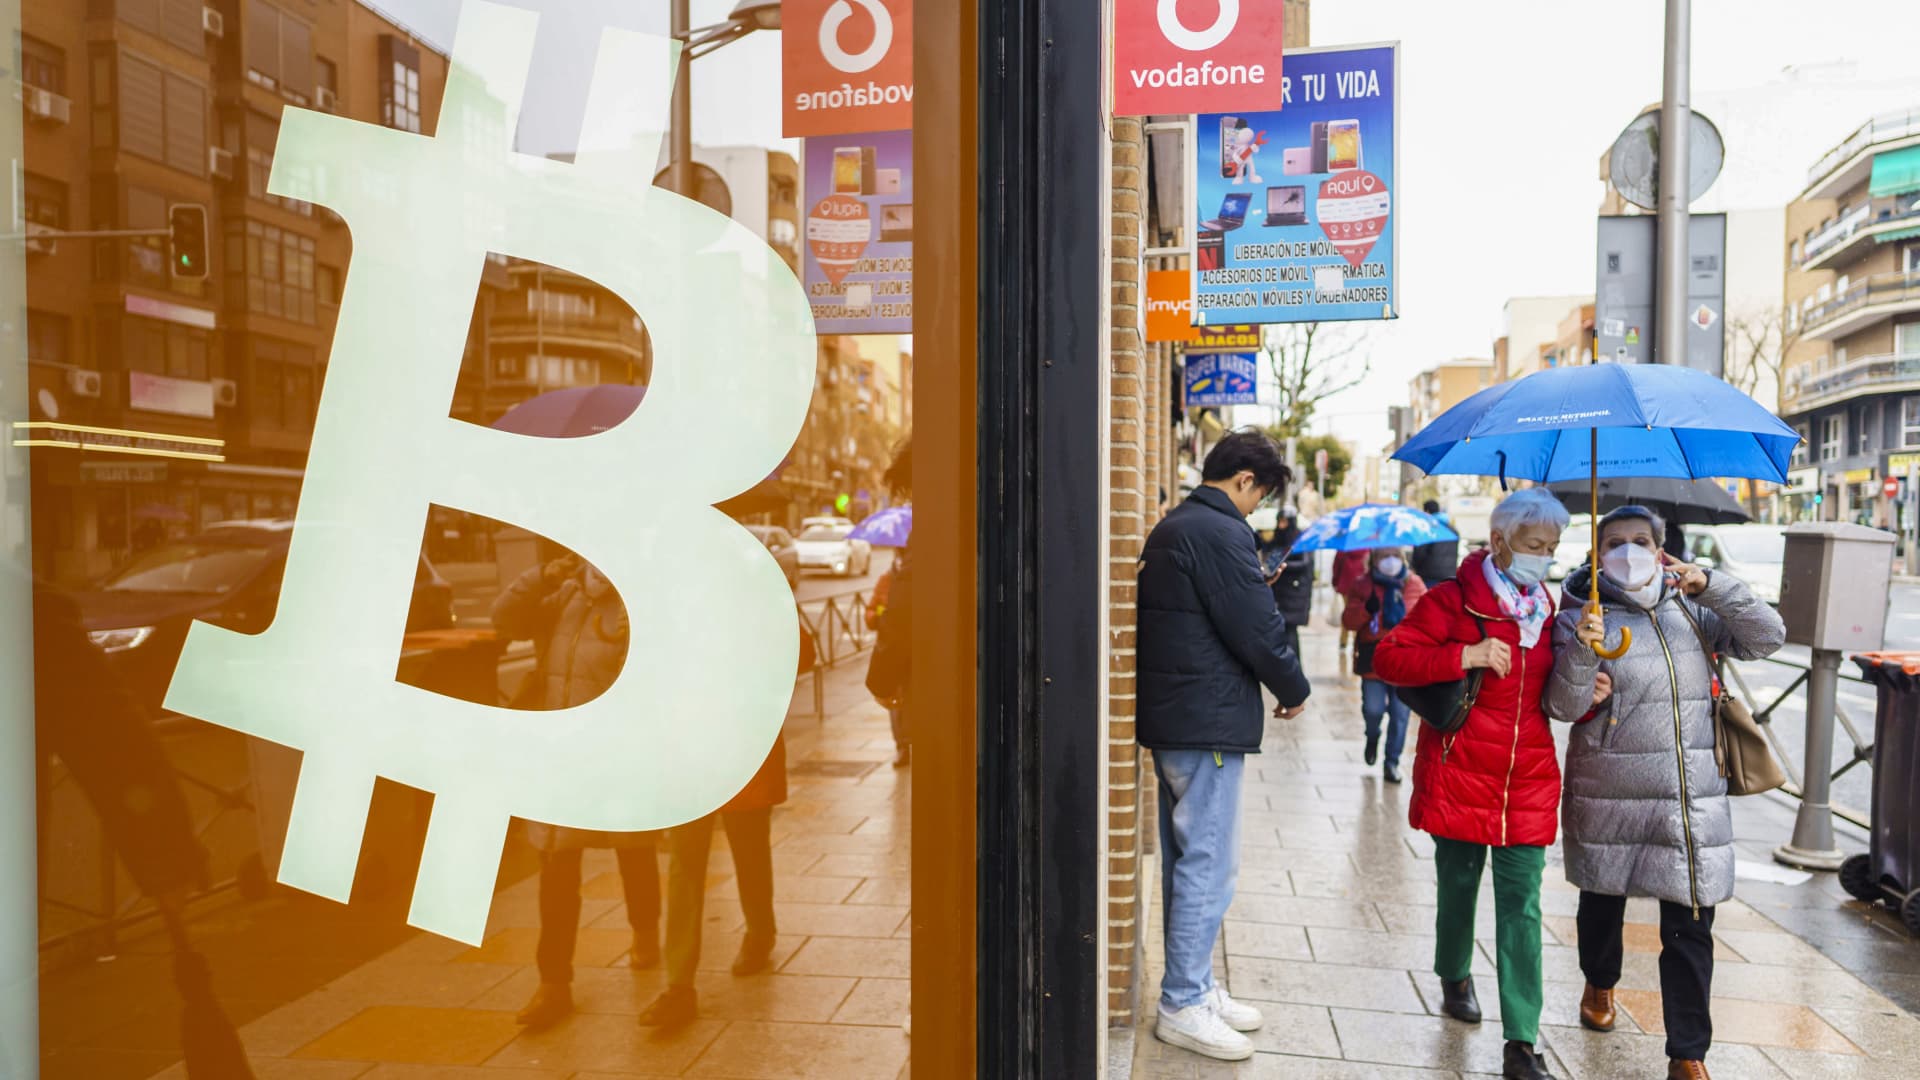 One in five adults has invested in, traded or used cryptocurrency, NBC News poll shows